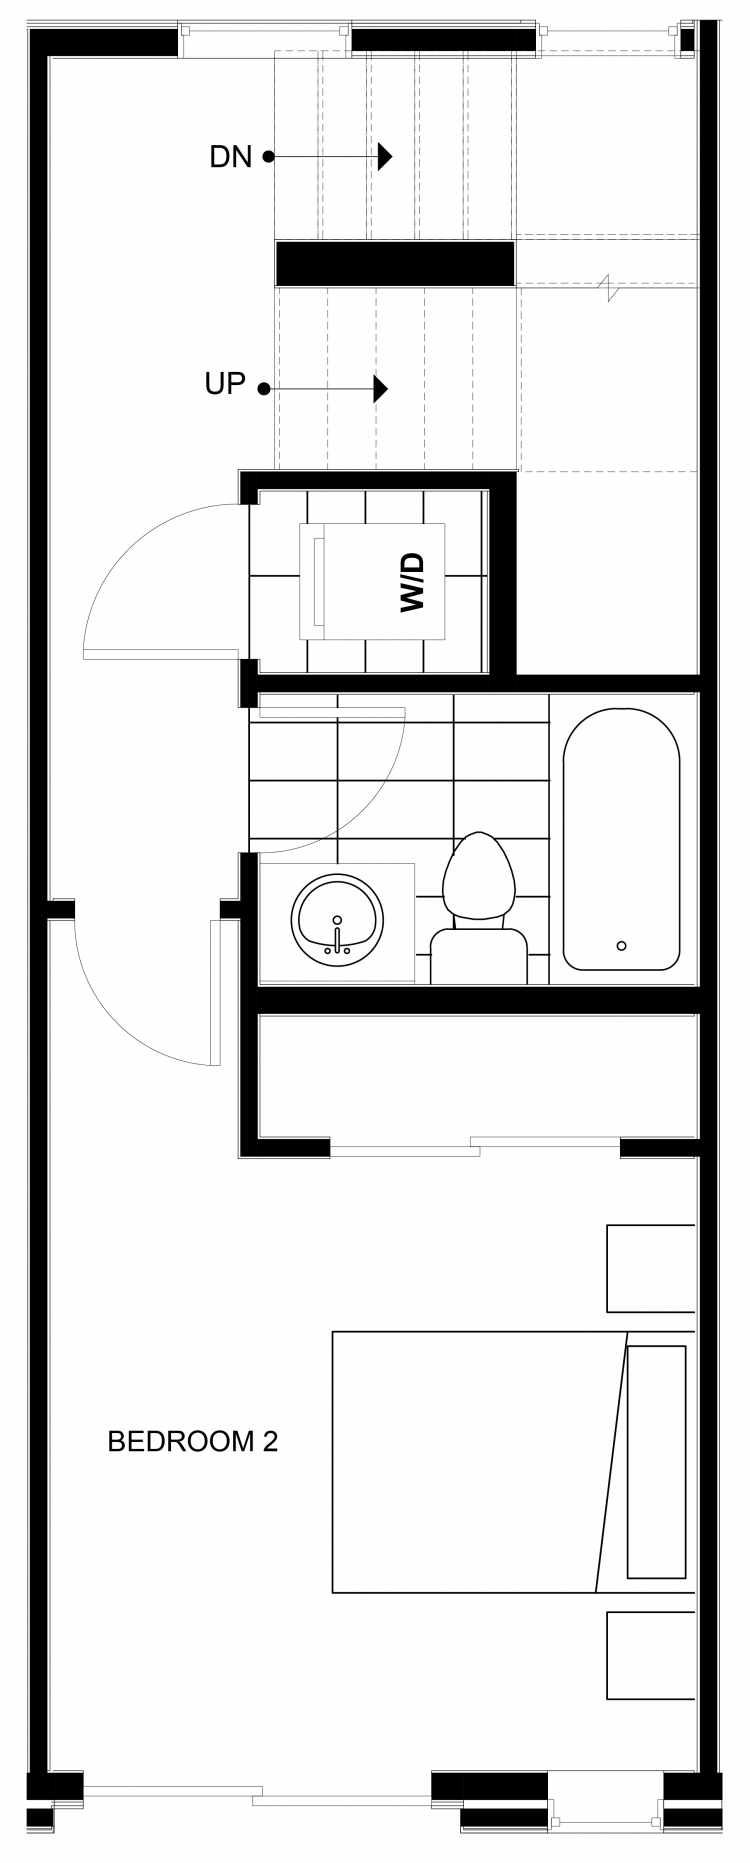 Third Floor Plan of 1542 15th Ave E, One of the Larrabee Townhomes in Capitol Hill